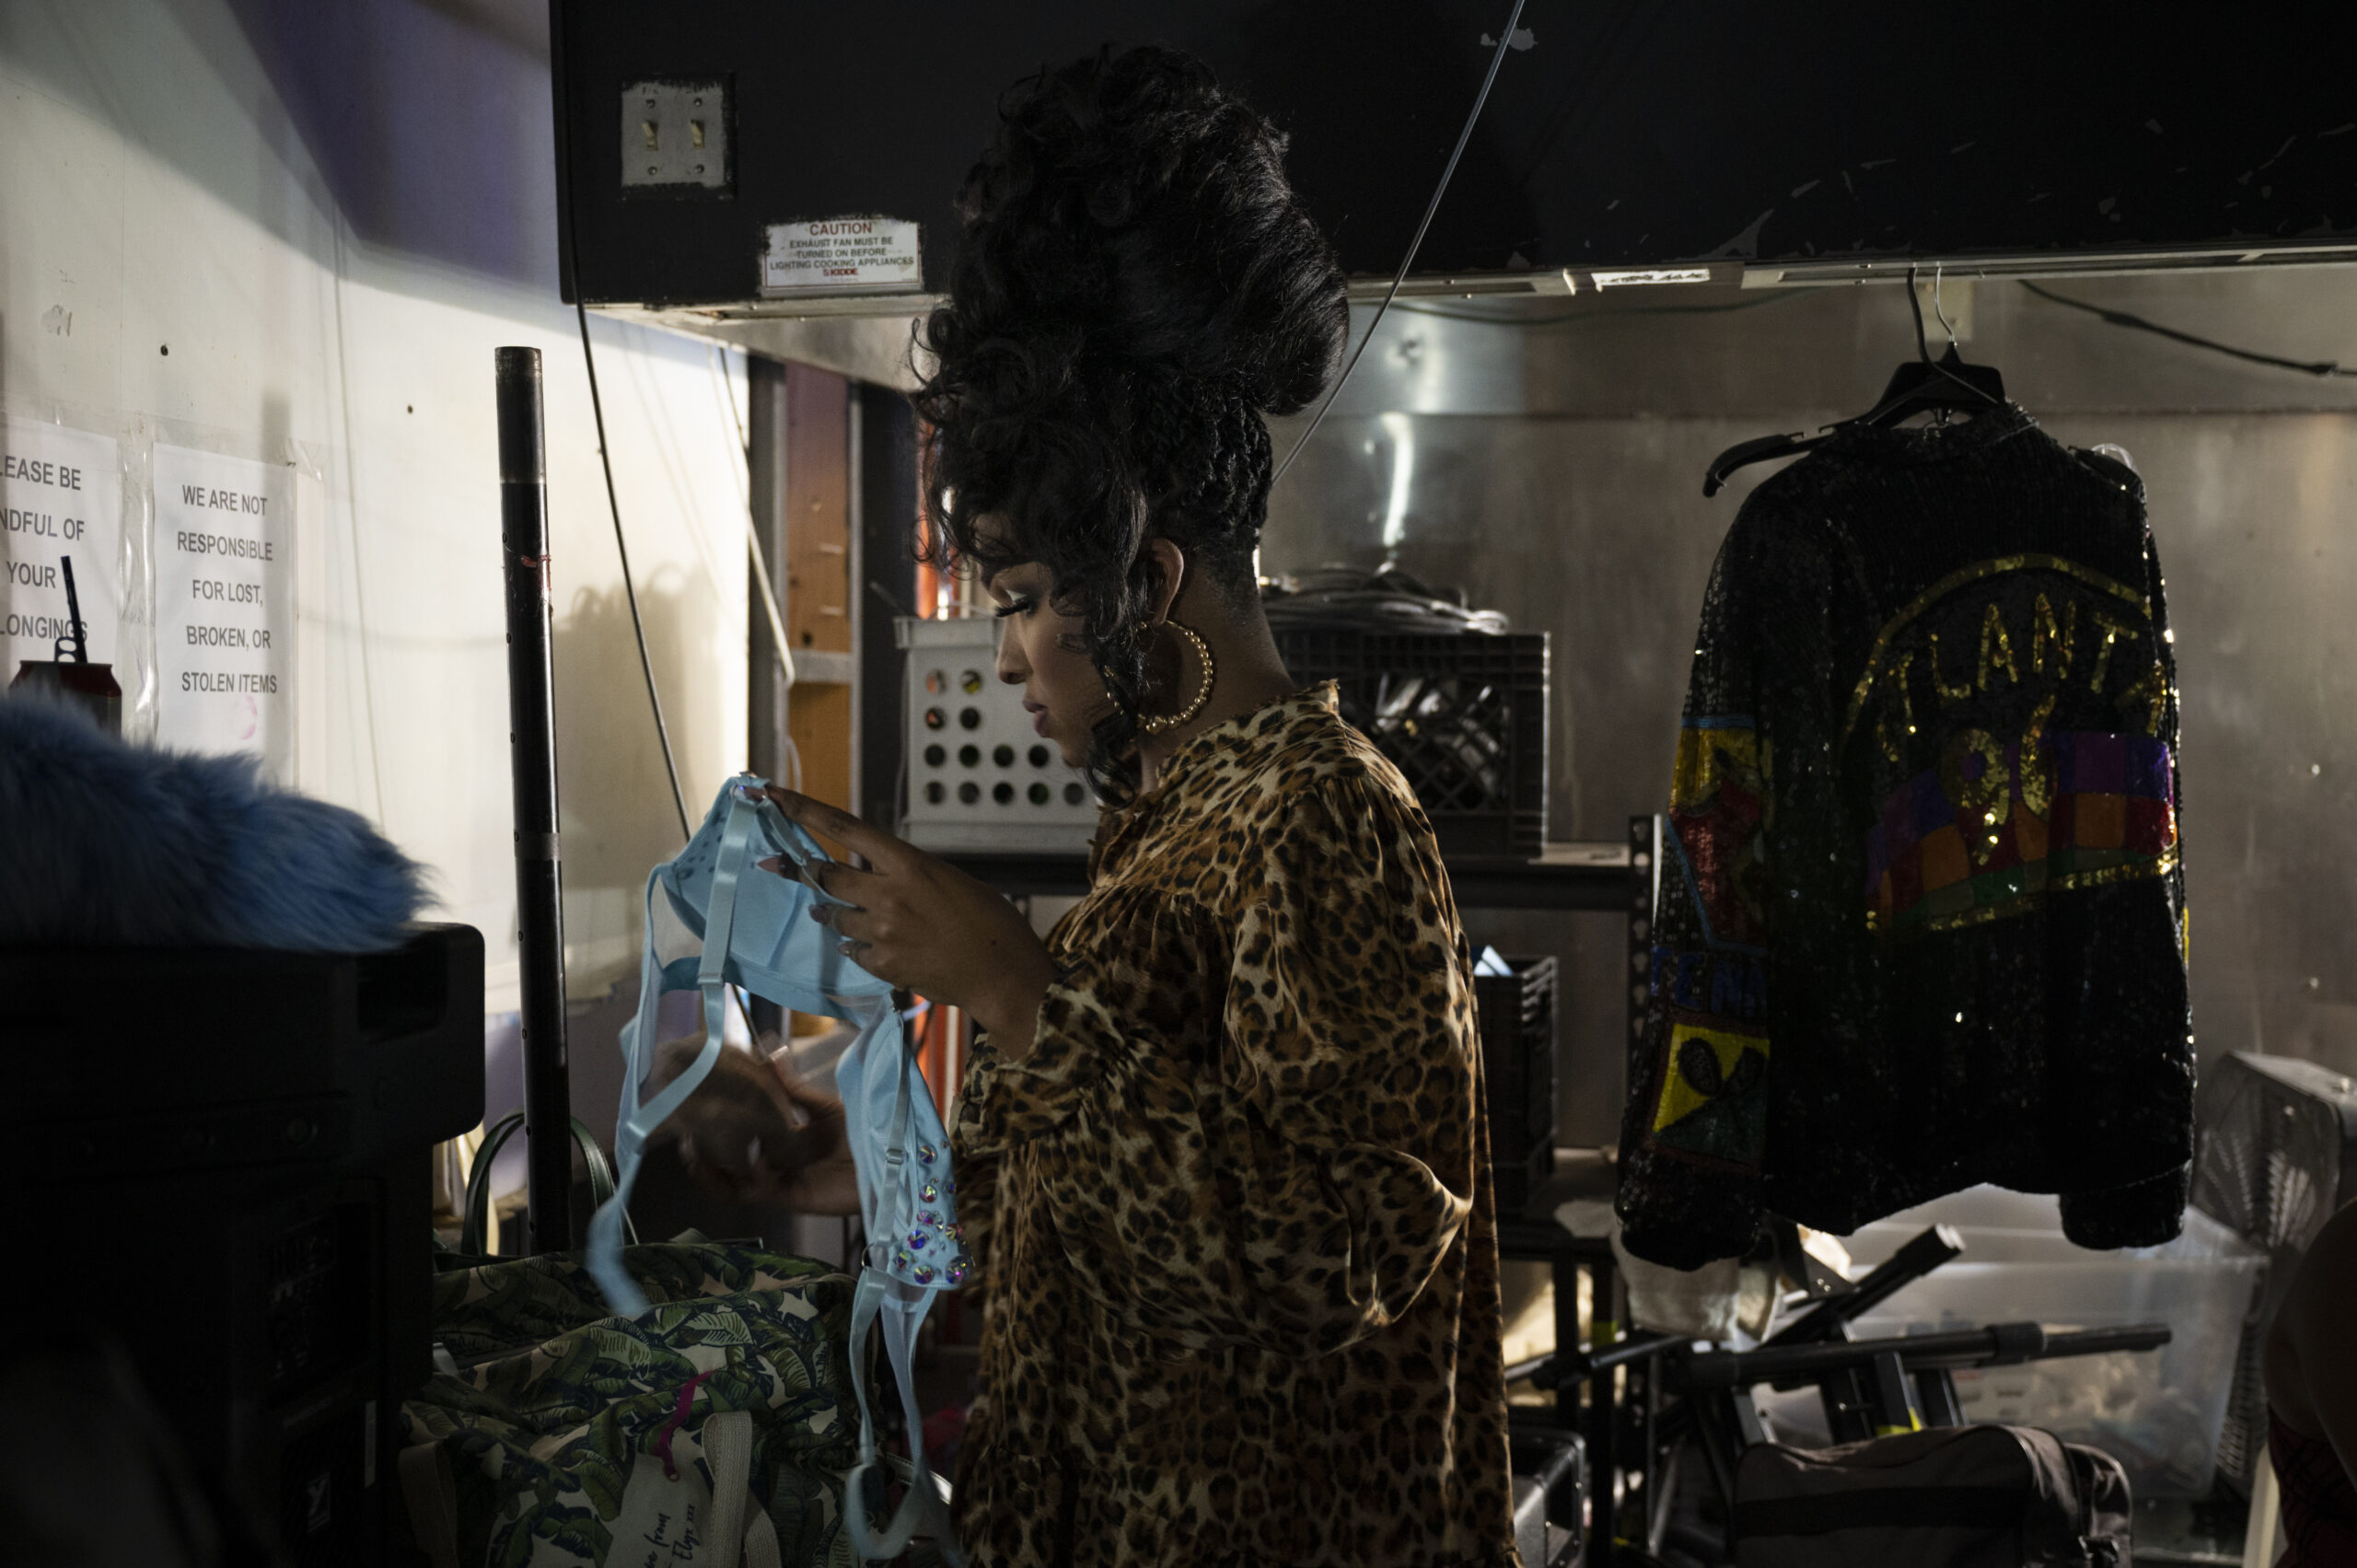 A Black woman with a very tall up-do and big hoop earrings, wearing a leopard print coat. She's holding a blue costume bra top in her hands as she stands in a backstage area.